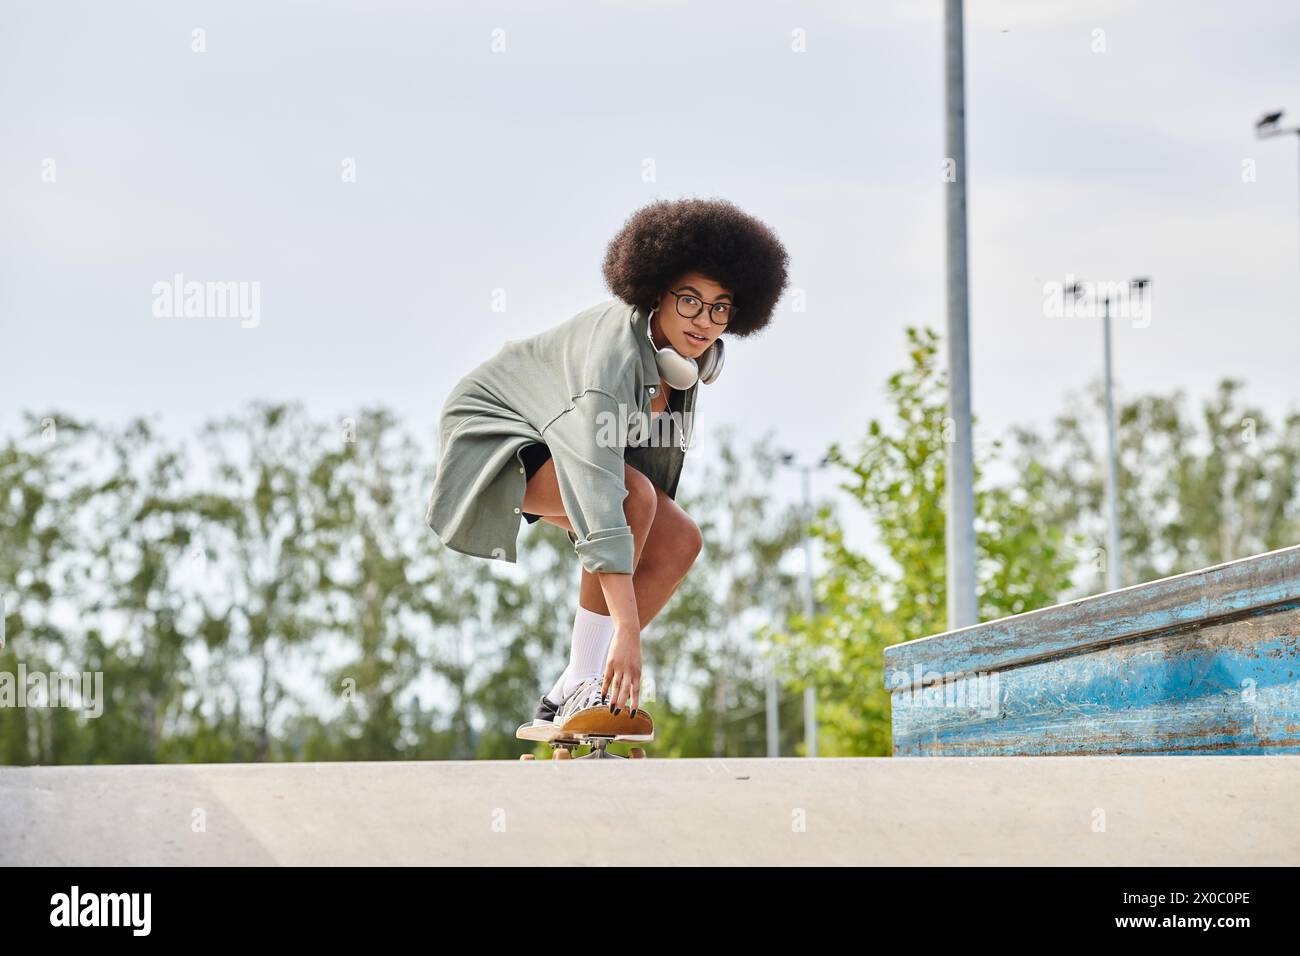 A young African American woman with curly hair confidently rides a skateboard down the ramp in a vibrant skatepark. Stock Photo